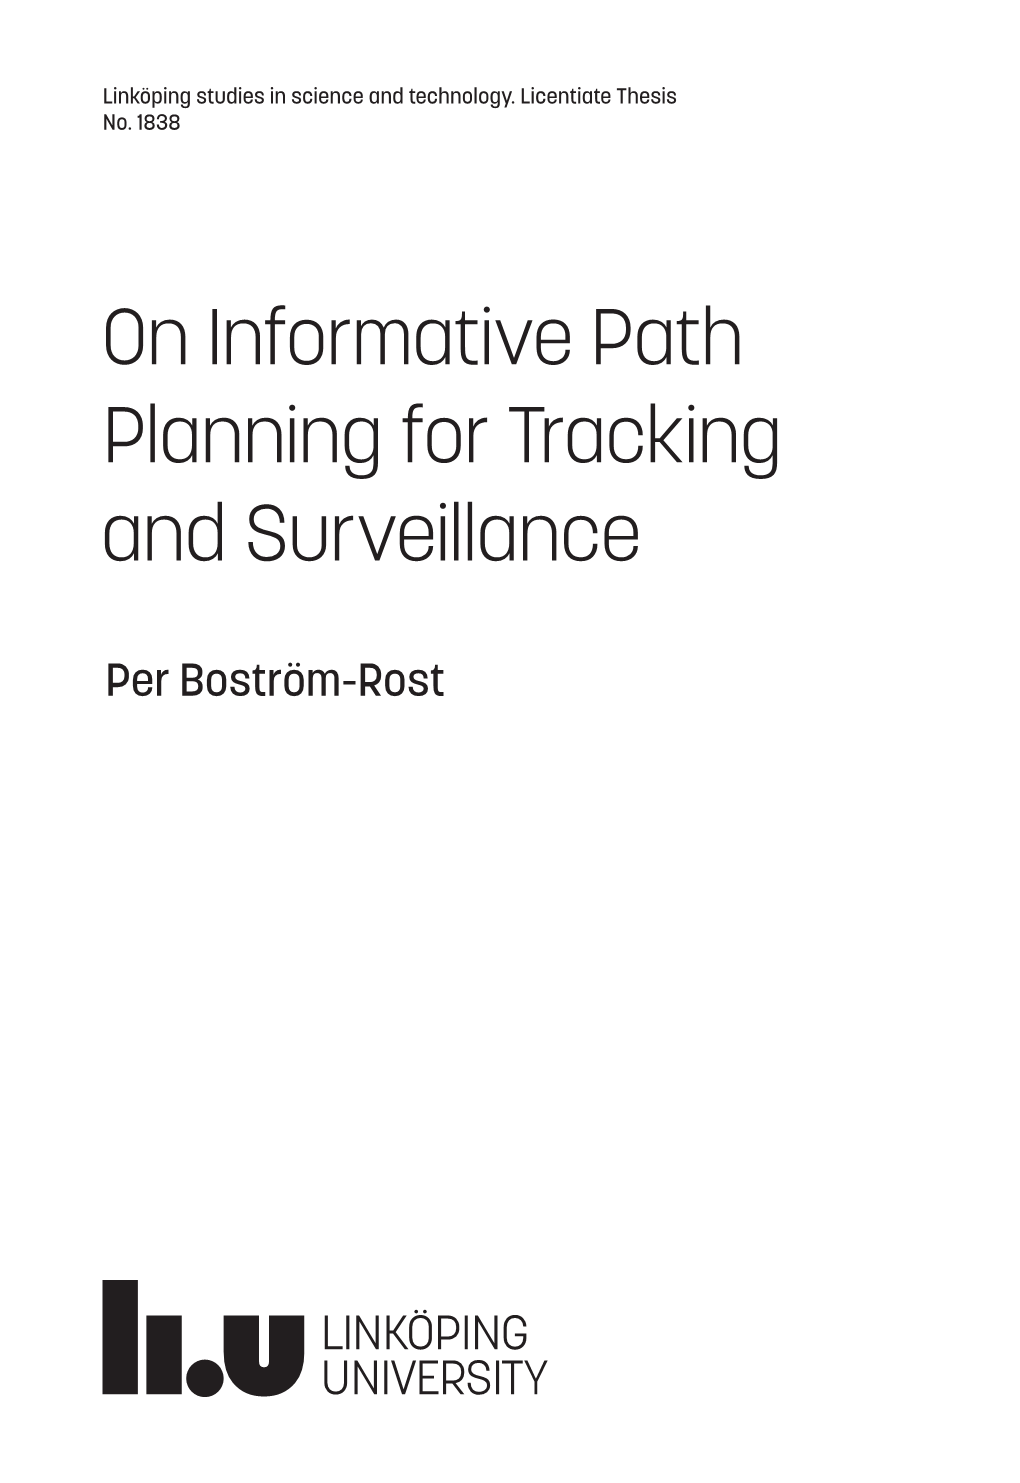 On Informative Path Planning for Tracking and Surveillance